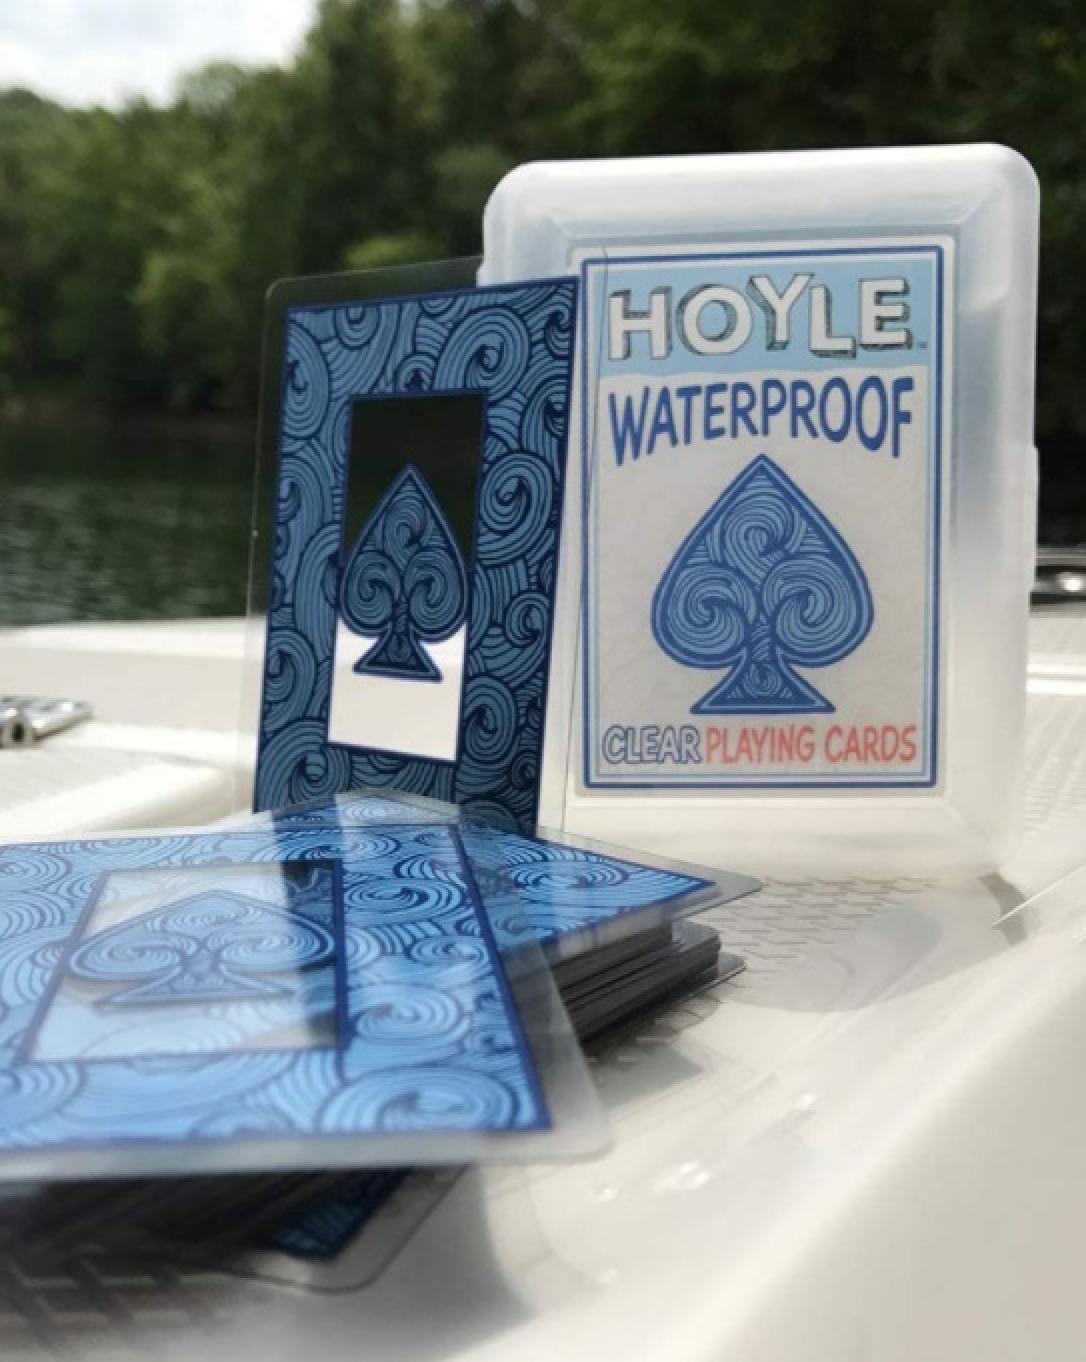 Hoyle Clear Waterproof Playing Cards Outside by Pool